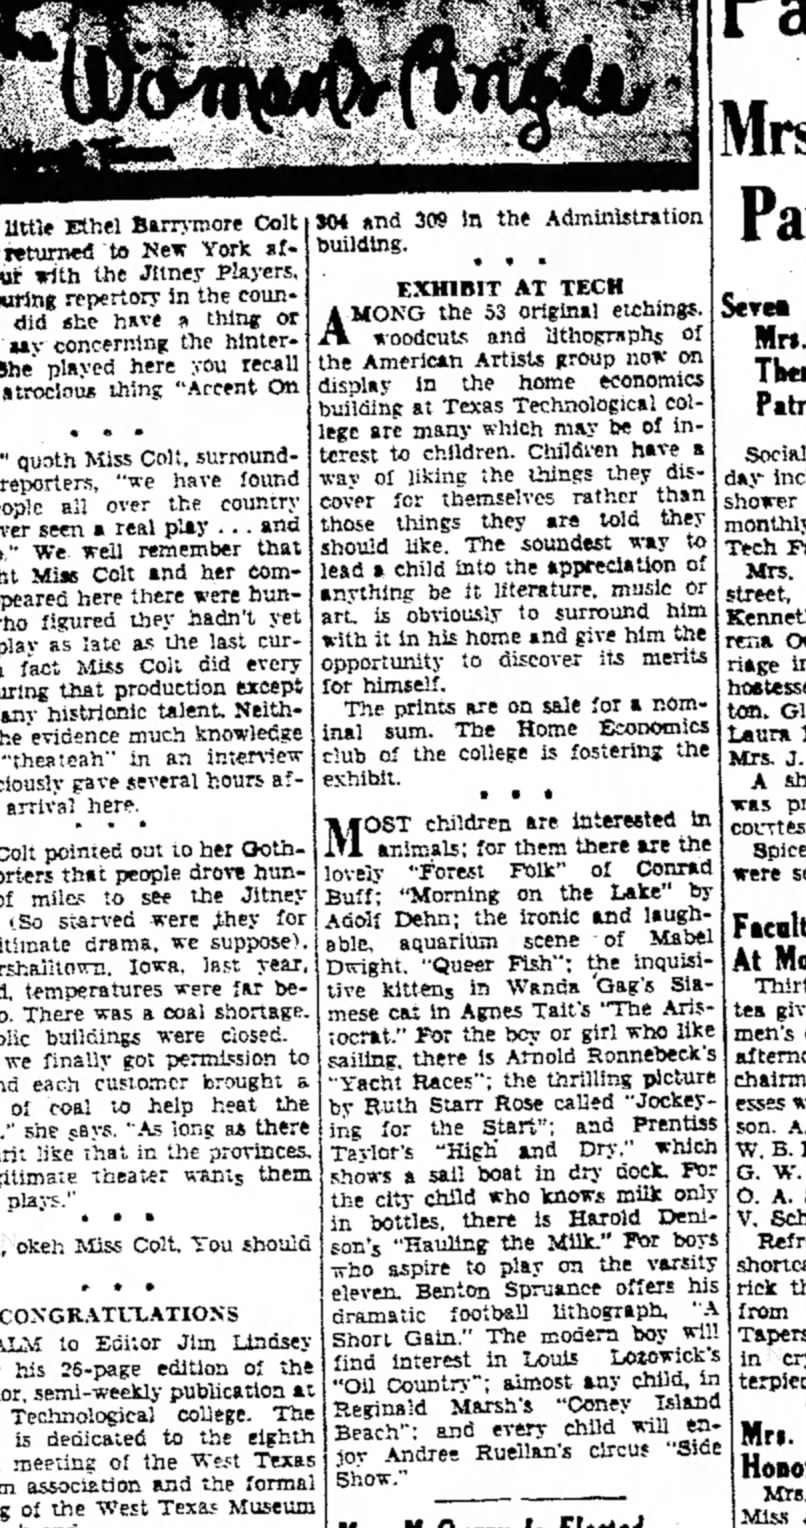 Lubbock Morning Avalanche (Lubbock, Texas), March 4, 1937, Thursday